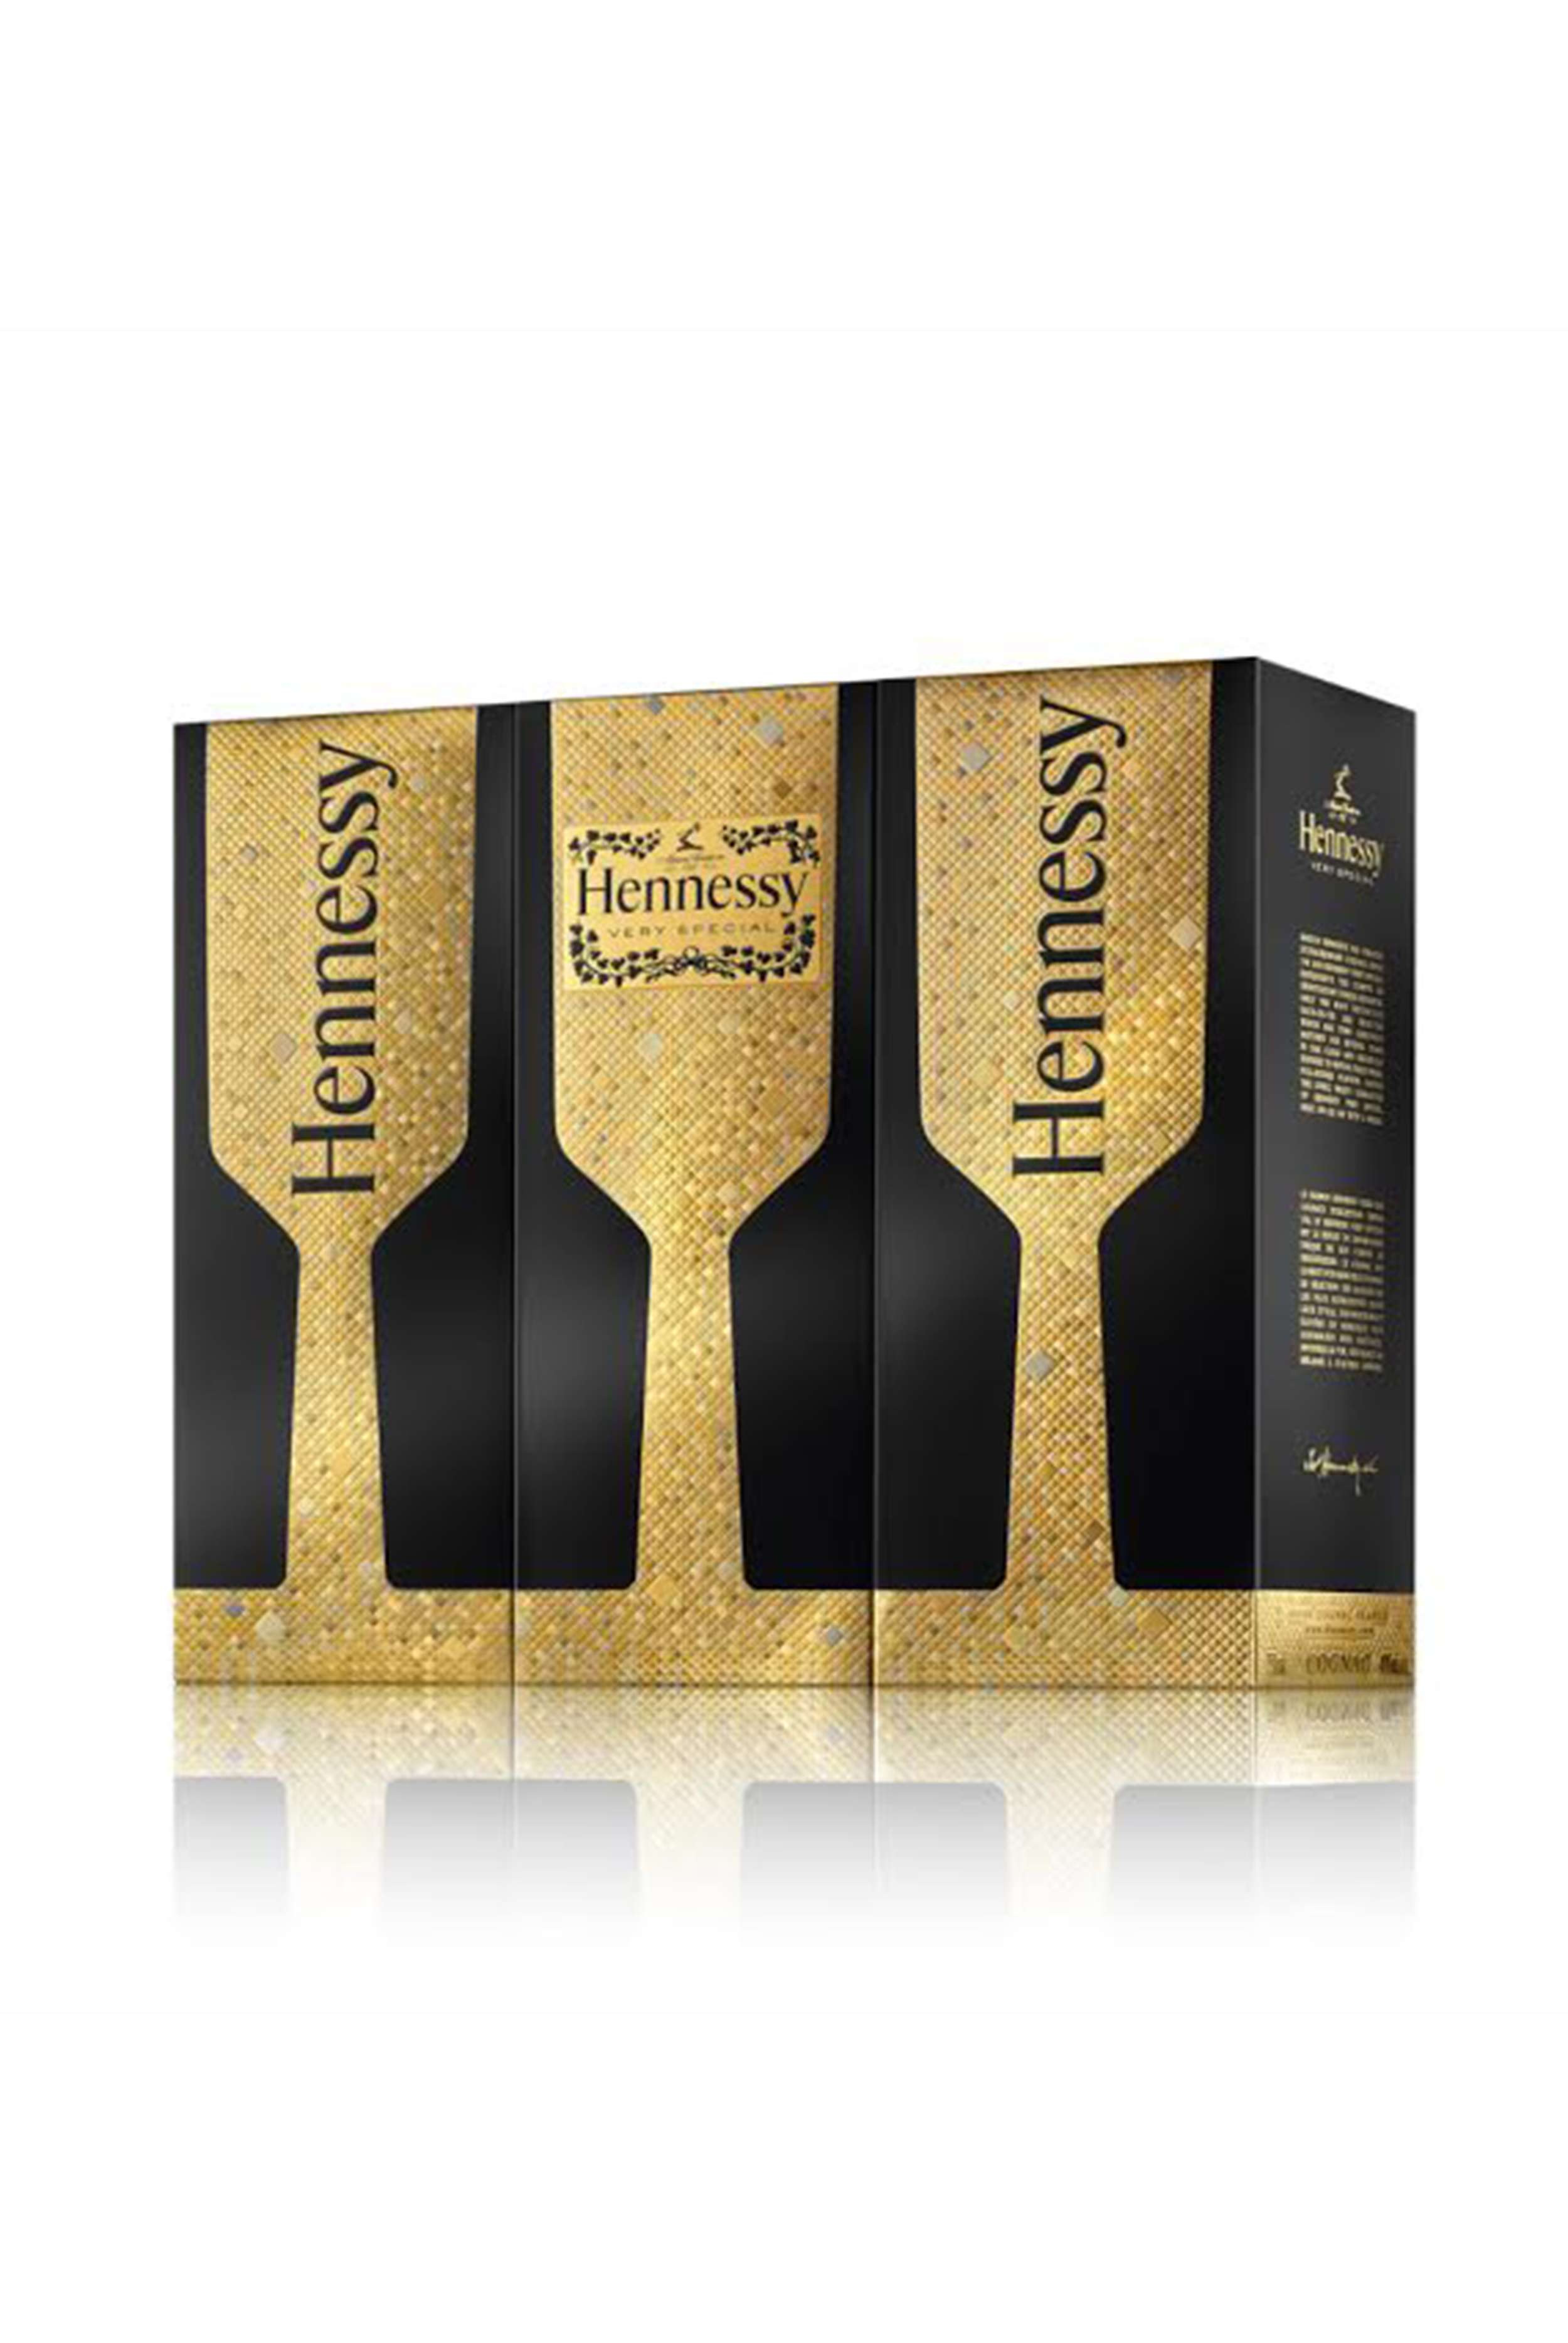 hennessy pack-end of year.png